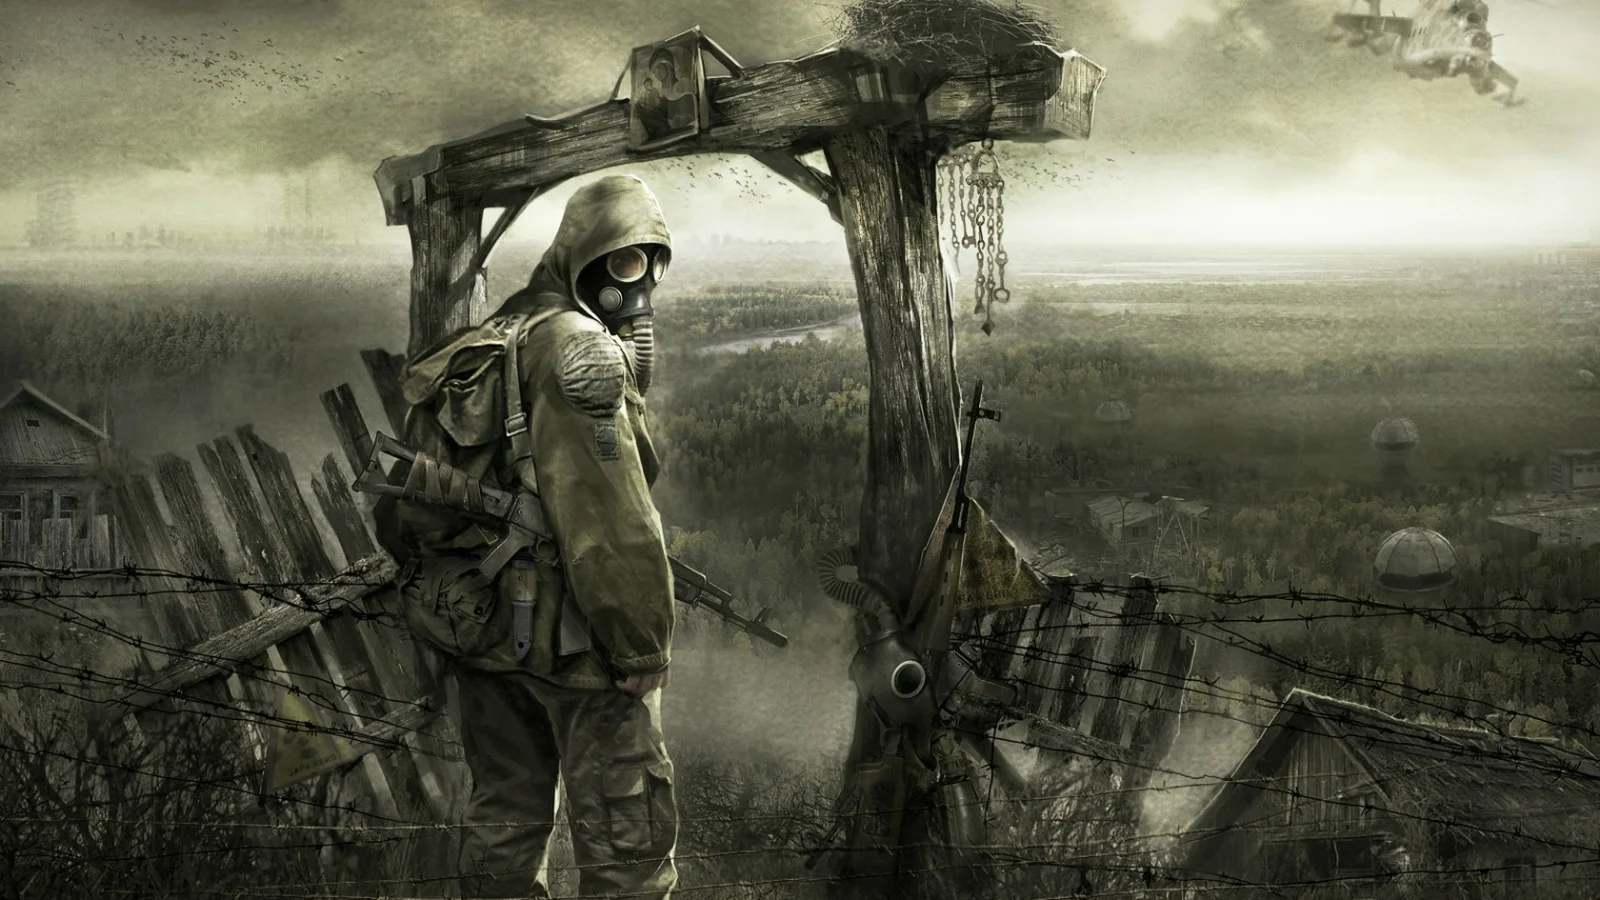 S.T.A.L.K.E.R.: Shadow of Chernobyl released on the Unreal Engine 5